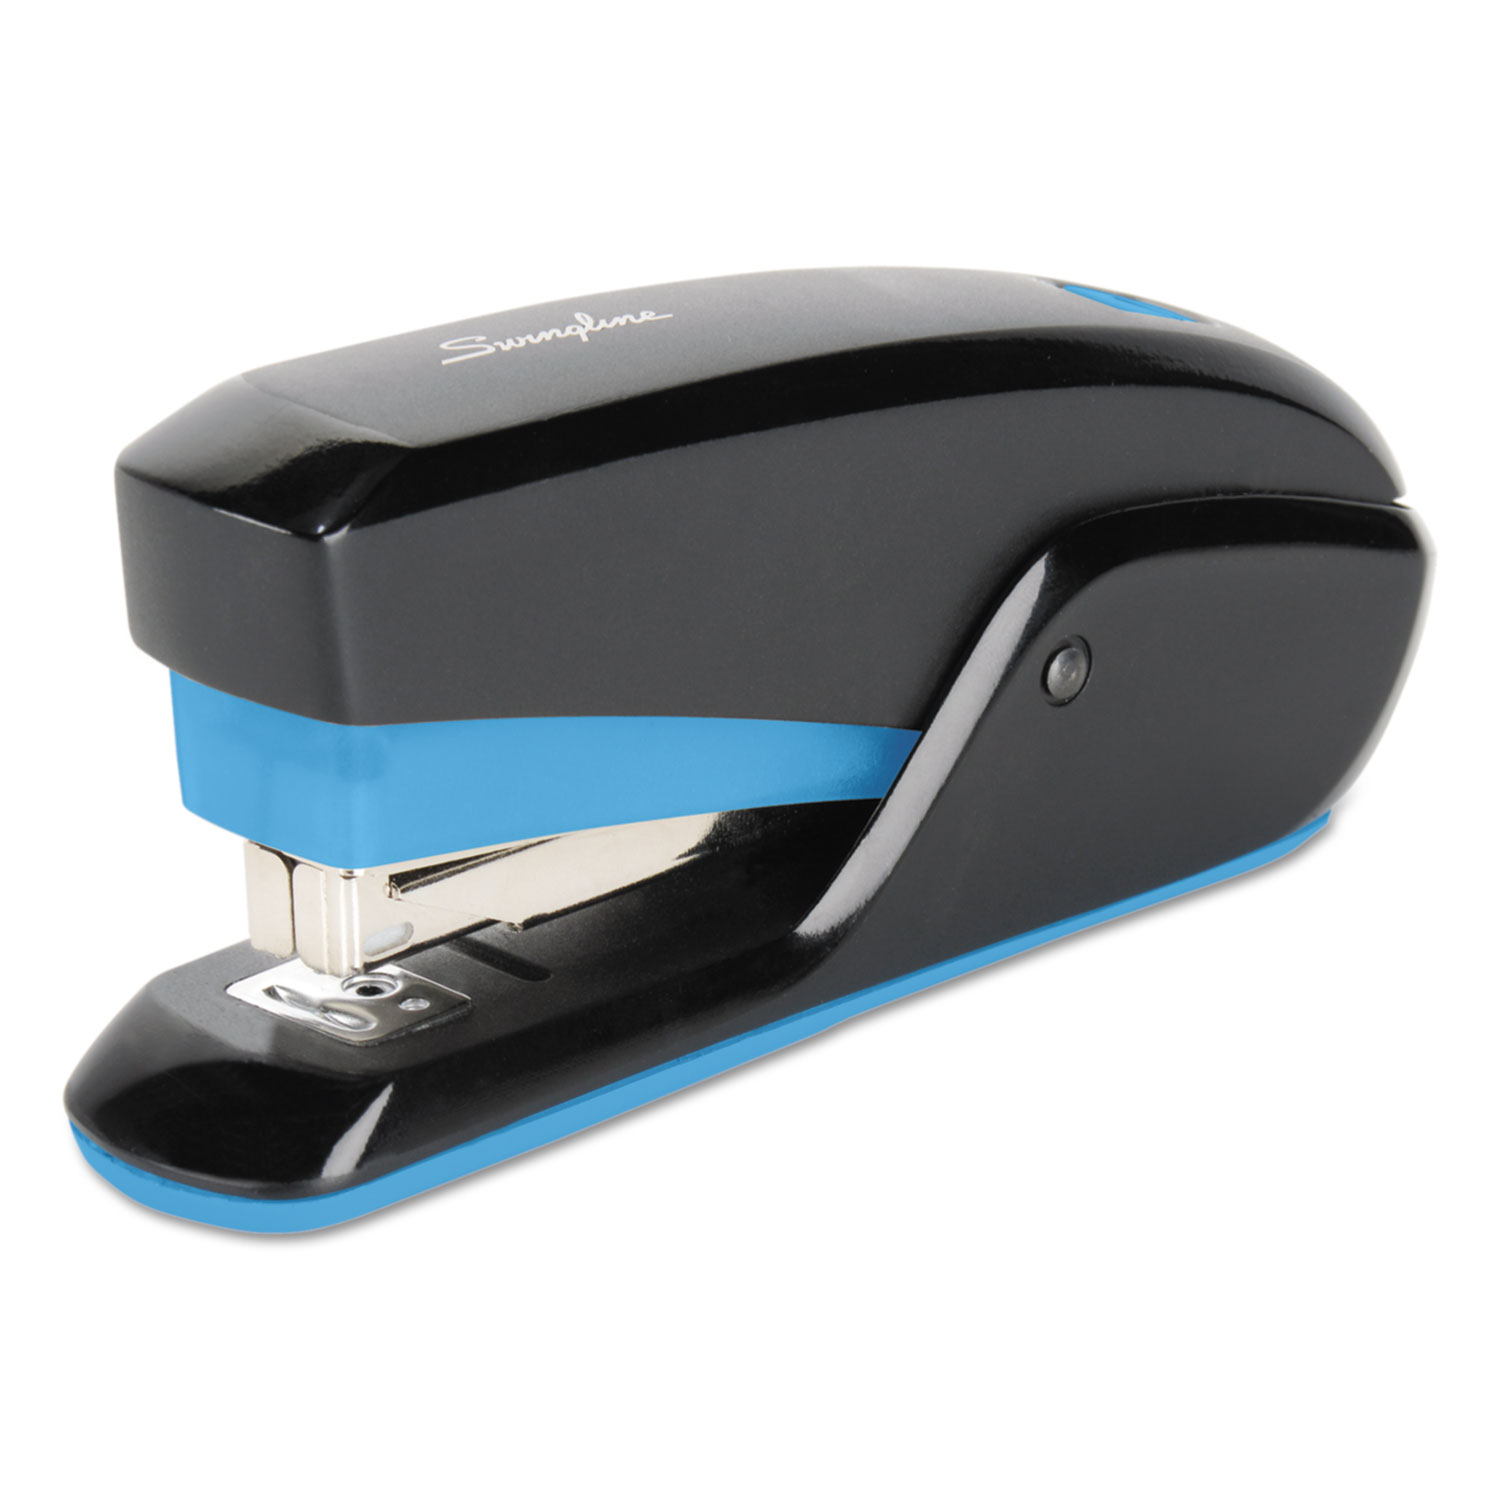 QuickTouch Reduced Effort Compact Stapler, 20-Sheet Capacity, Black/Blue